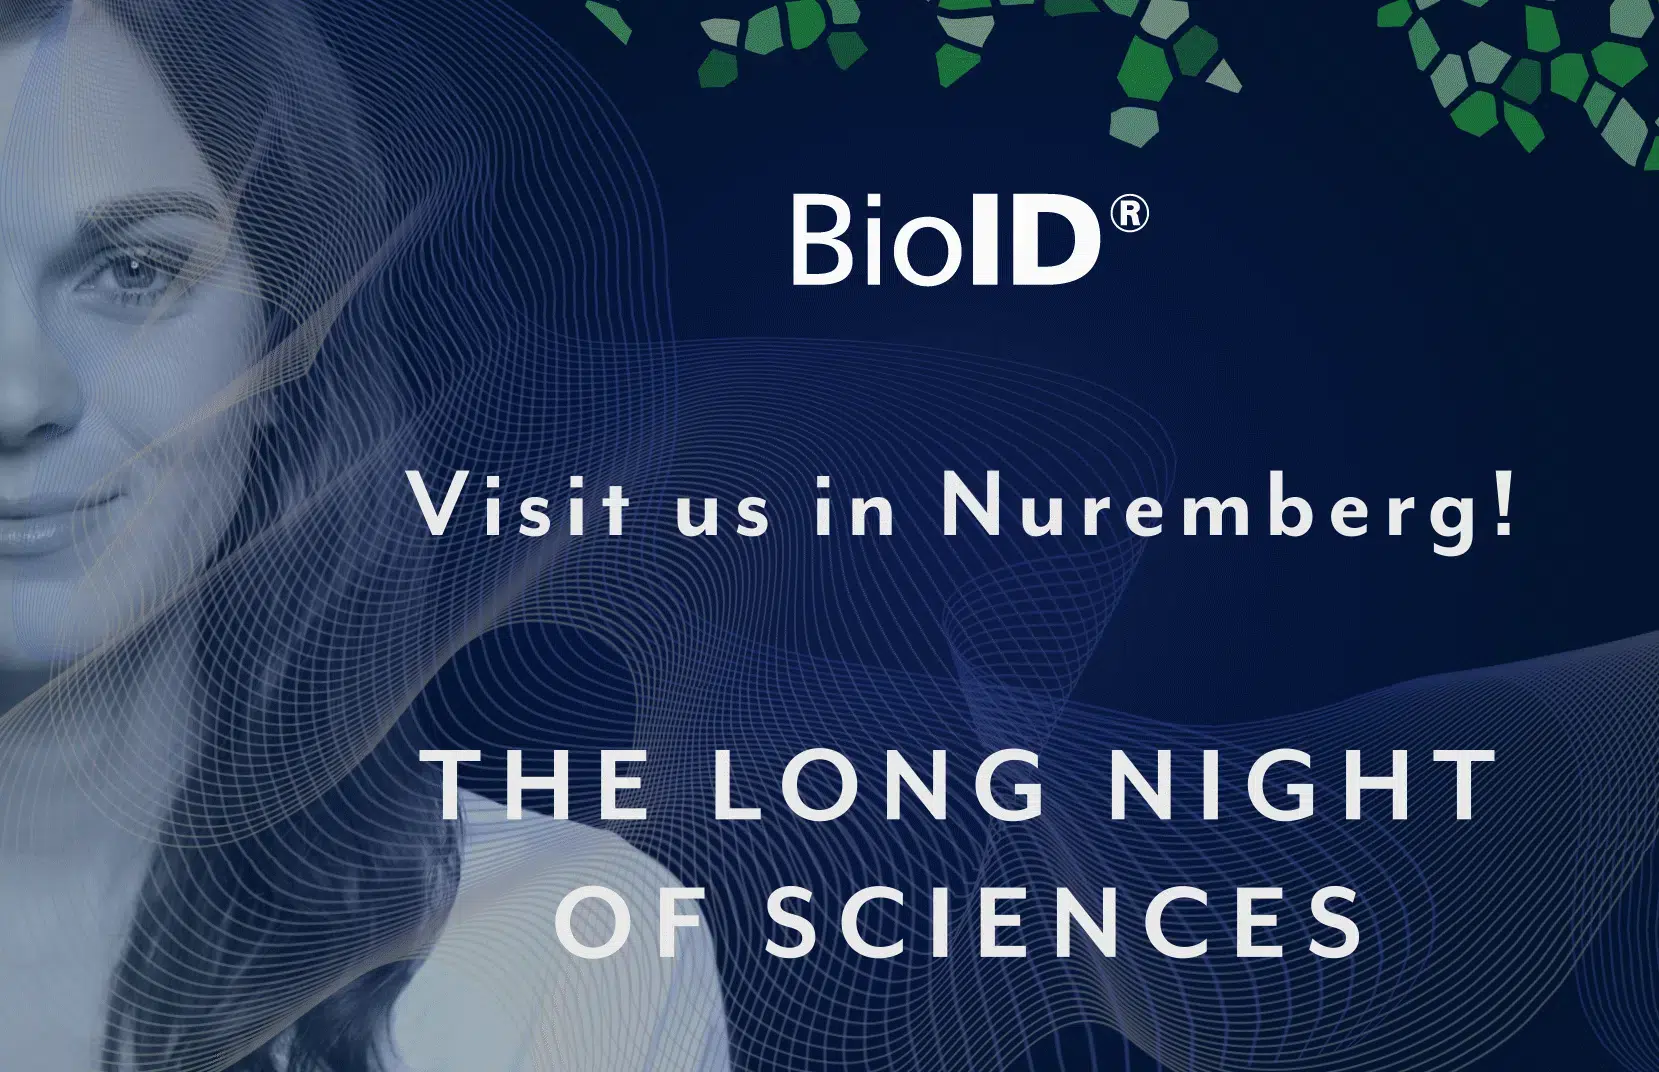 Biometrics made in Nuremberg with anti-spoofing presentation attack detection by BioID